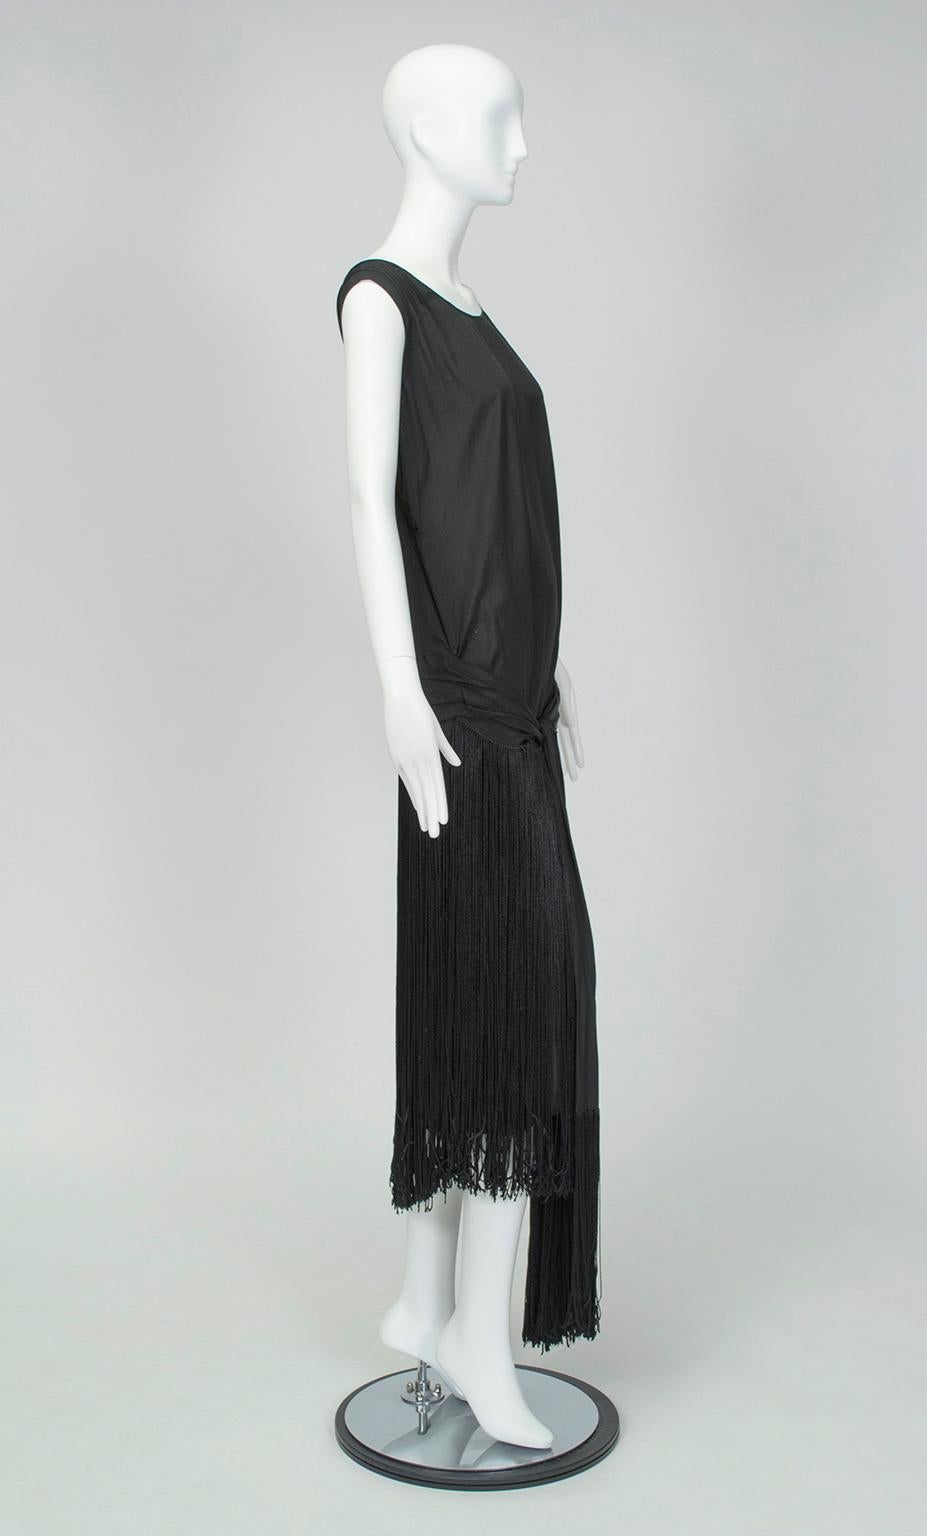 A transformative dress with a fetching shirred cummerbund that cups the tush and 2-foot fringe that never stops moving. Begs for a headpiece, garter flask and dance partner. 

Sleeveless flapper dress with plunging back, pintuck shoulders and